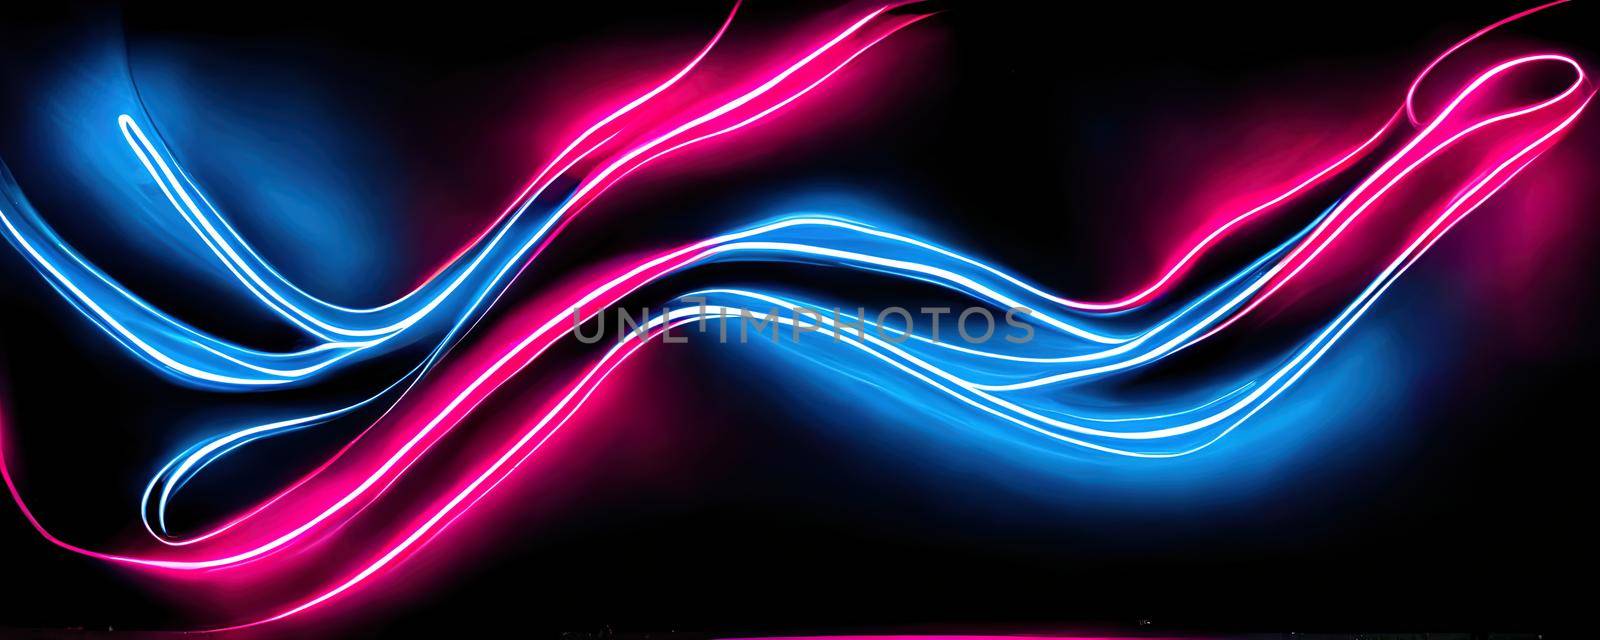 abstract neon colored lines wall background, neon blue and pink colors by TRMK